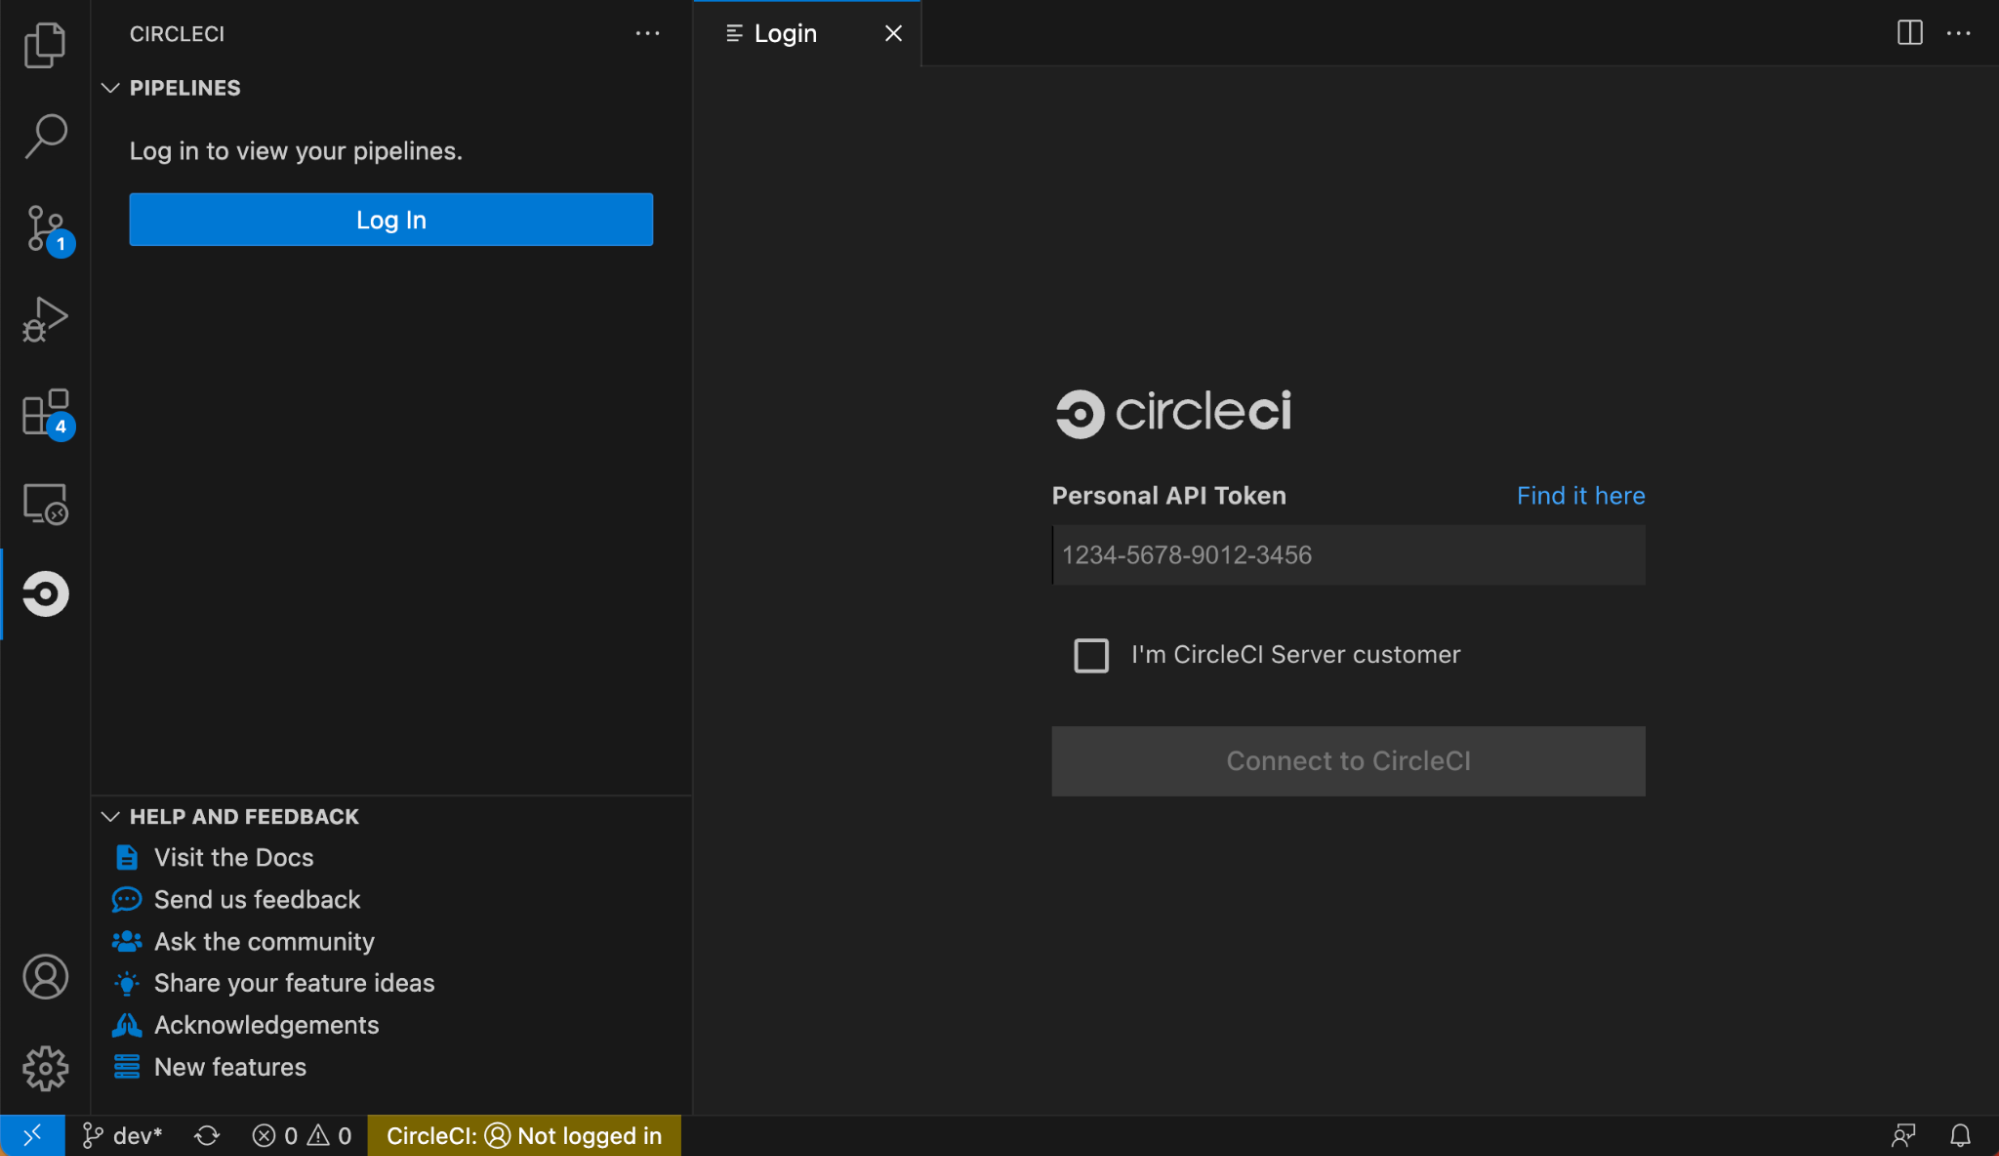 Log in to CircleCI from VS Code